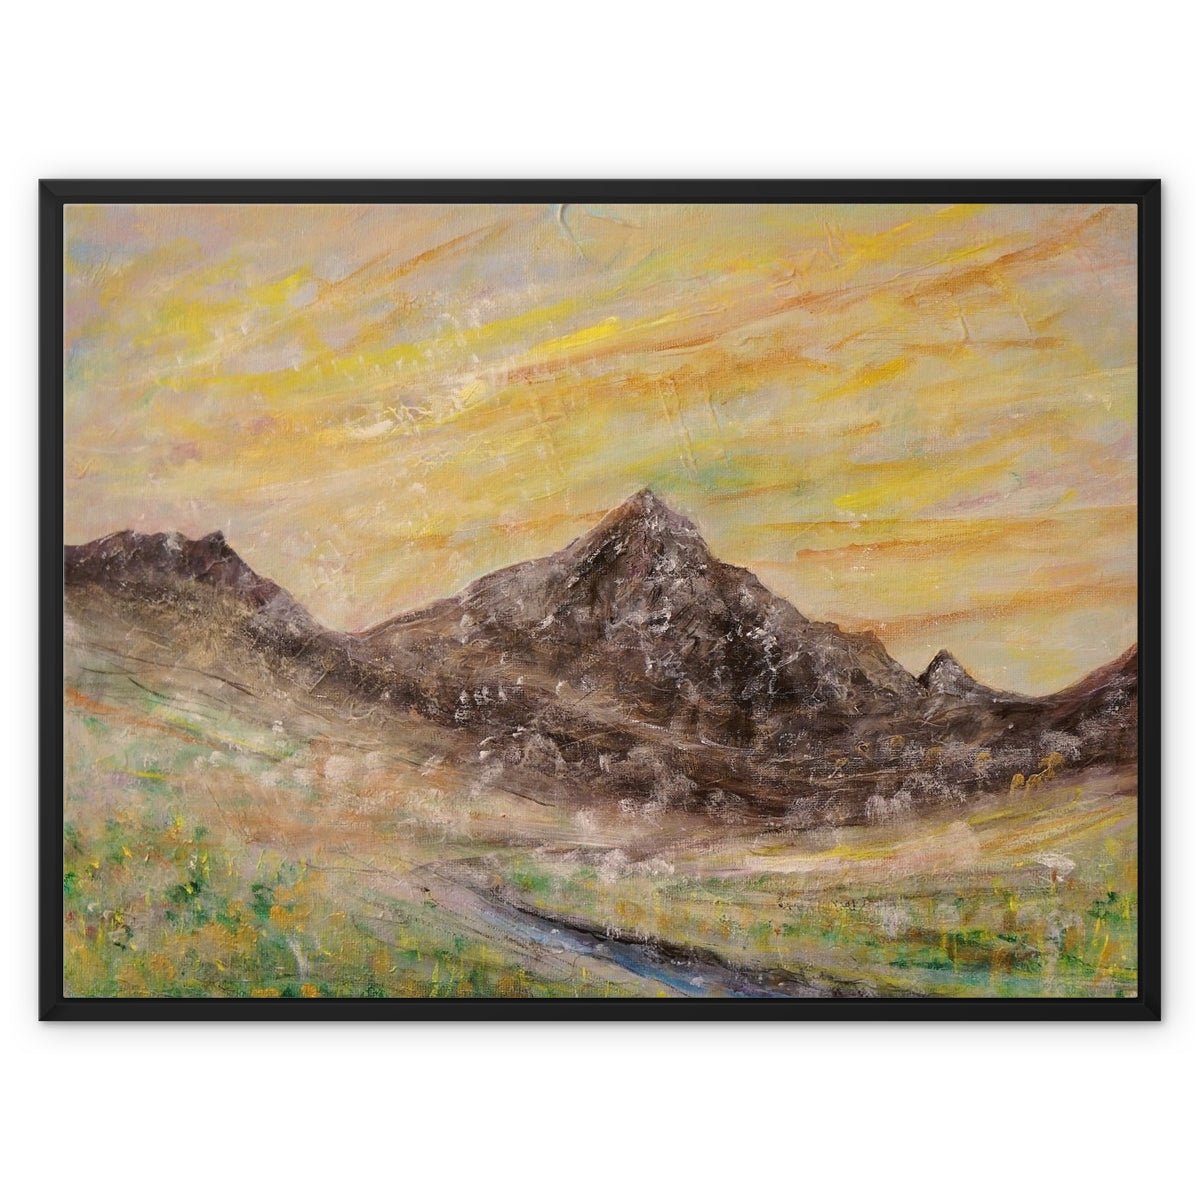 Glen Rosa Mist Painting | Framed Canvas From Scotland-Floating Framed Canvas Prints-Arran Art Gallery-32"x24"-Black Frame-Paintings, Prints, Homeware, Art Gifts From Scotland By Scottish Artist Kevin Hunter